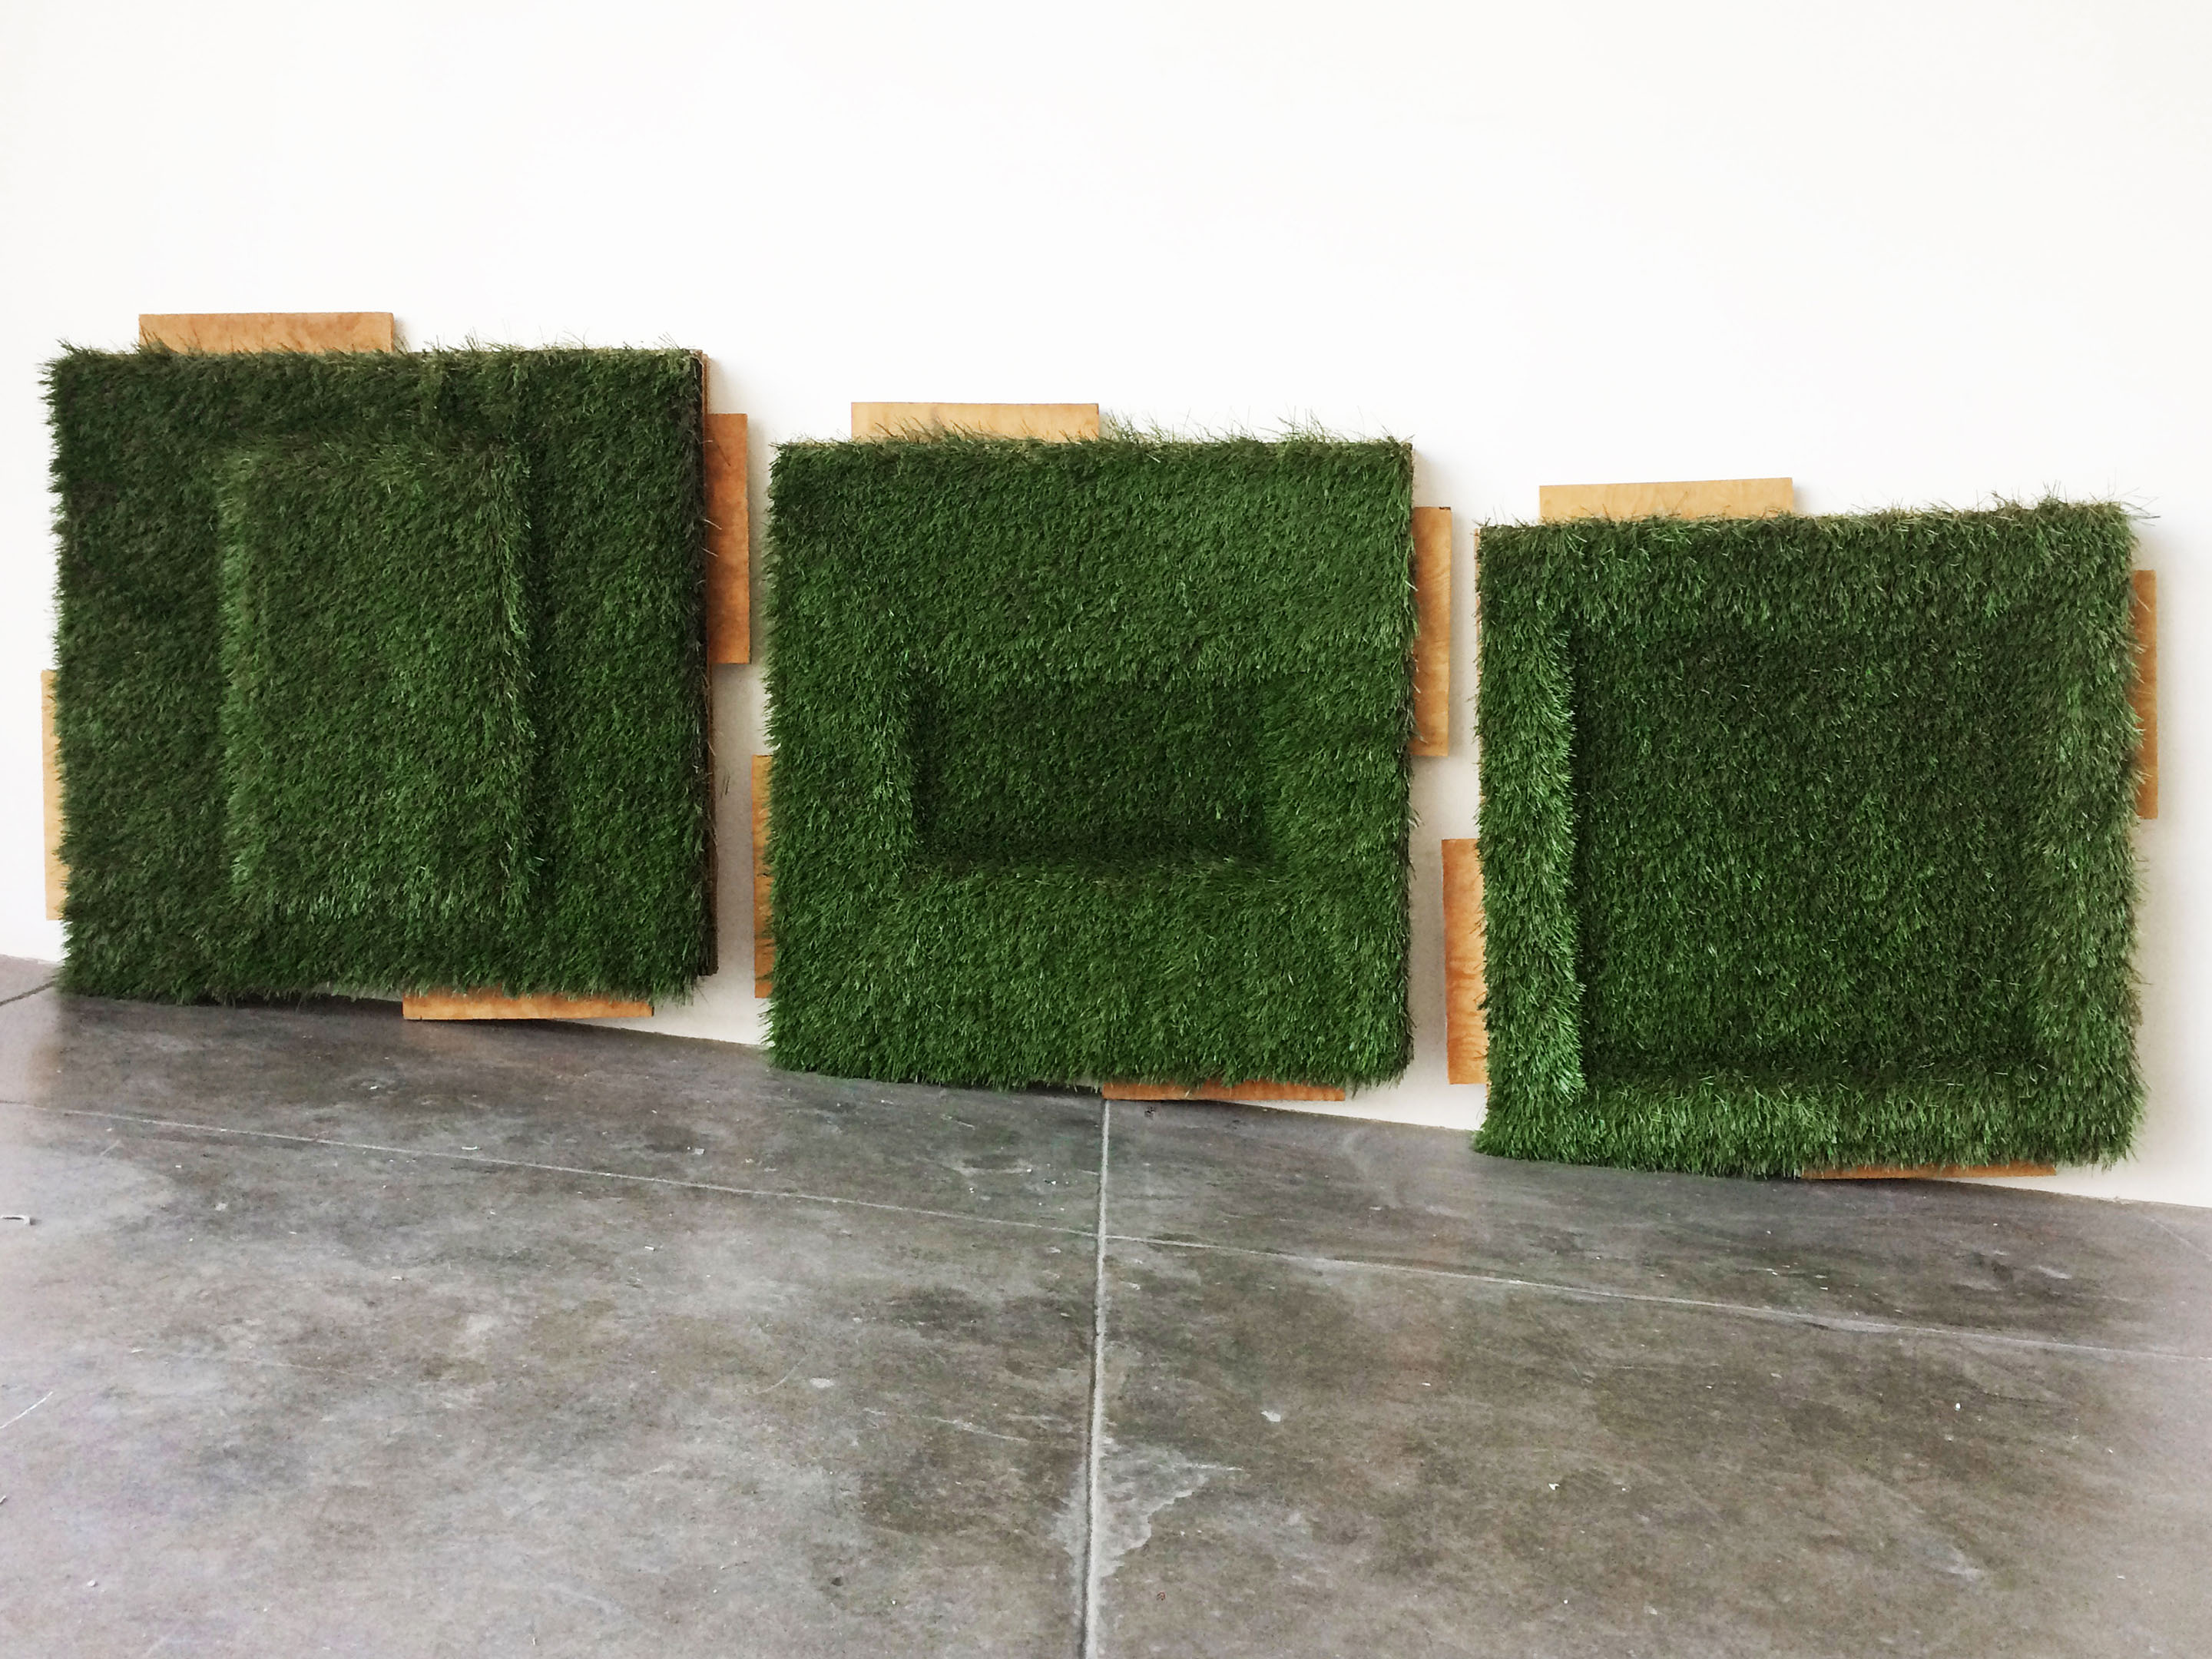 Practice Mat, TURF Group Exhibition, 2016, Materials & Applications, Los Angeles